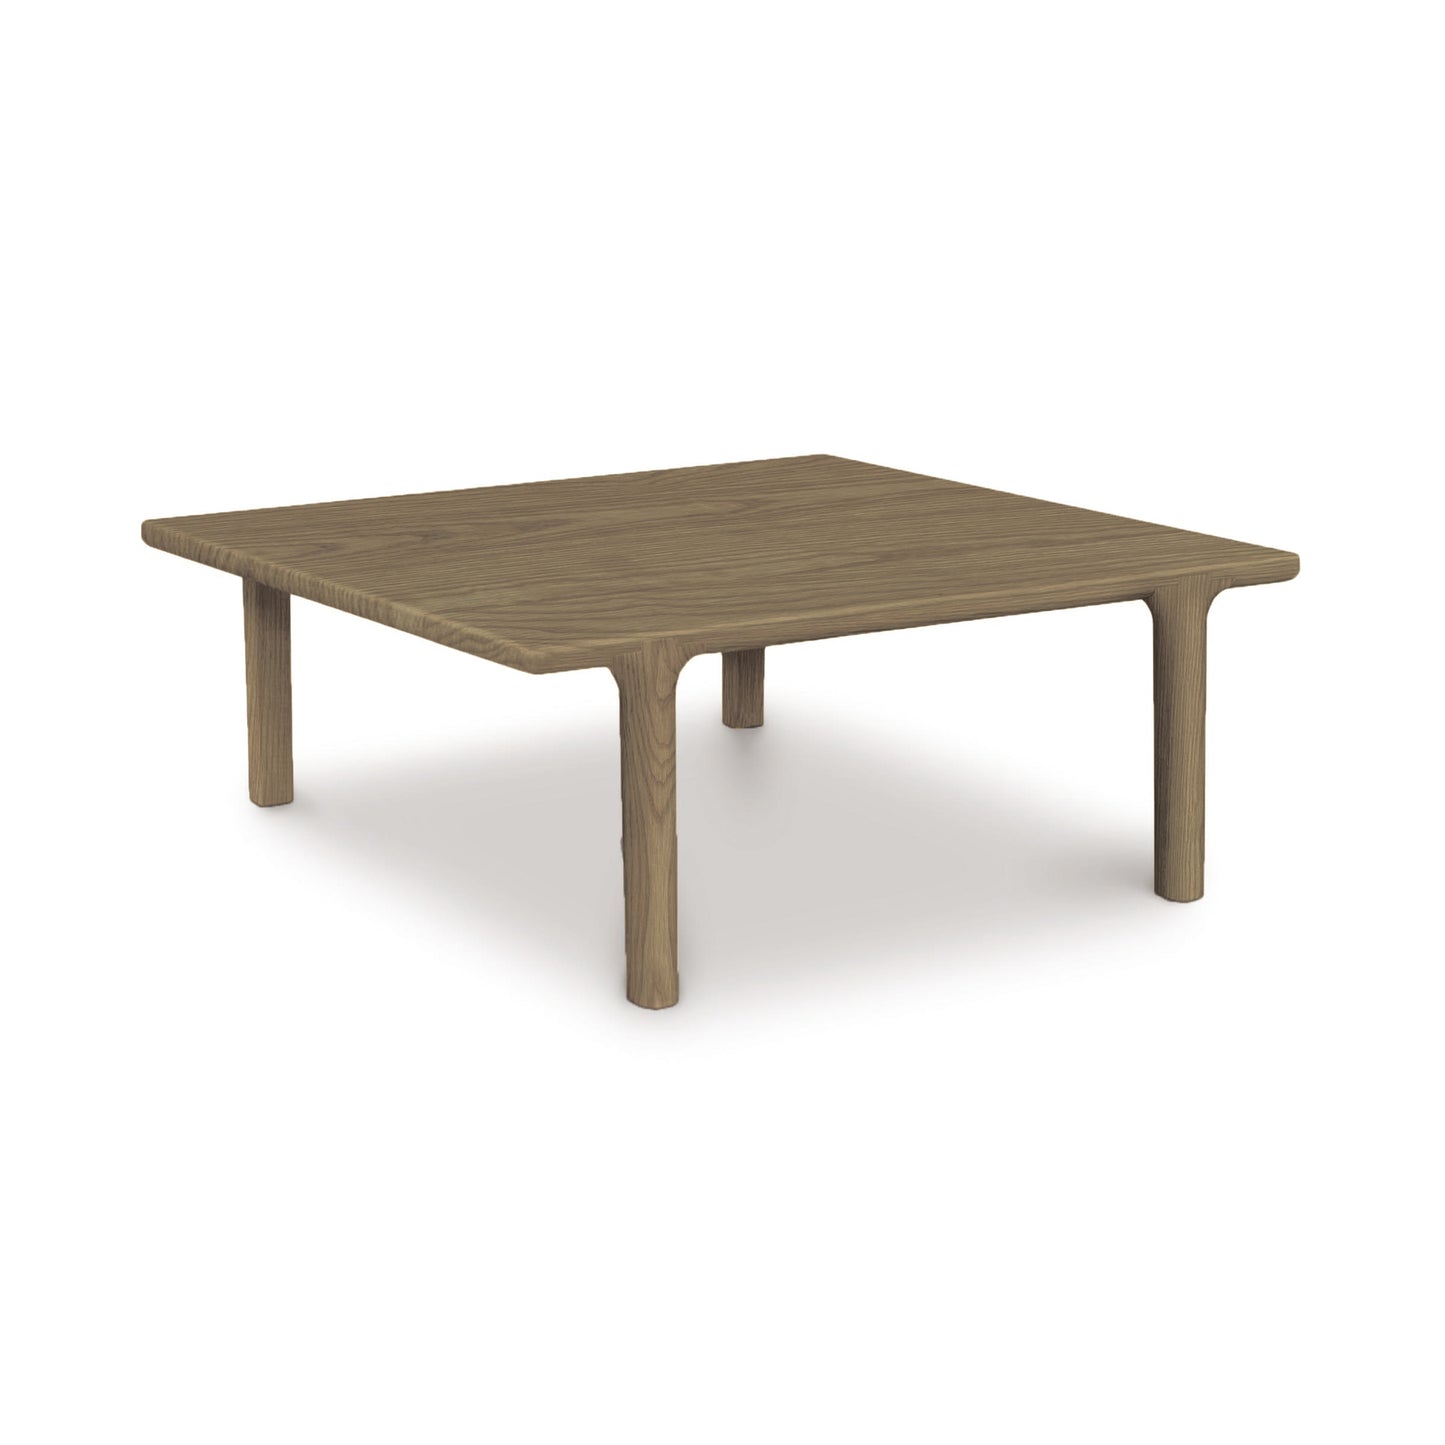 A simple Copeland Furniture Sierra Square Coffee Table with four legs on a plain background.